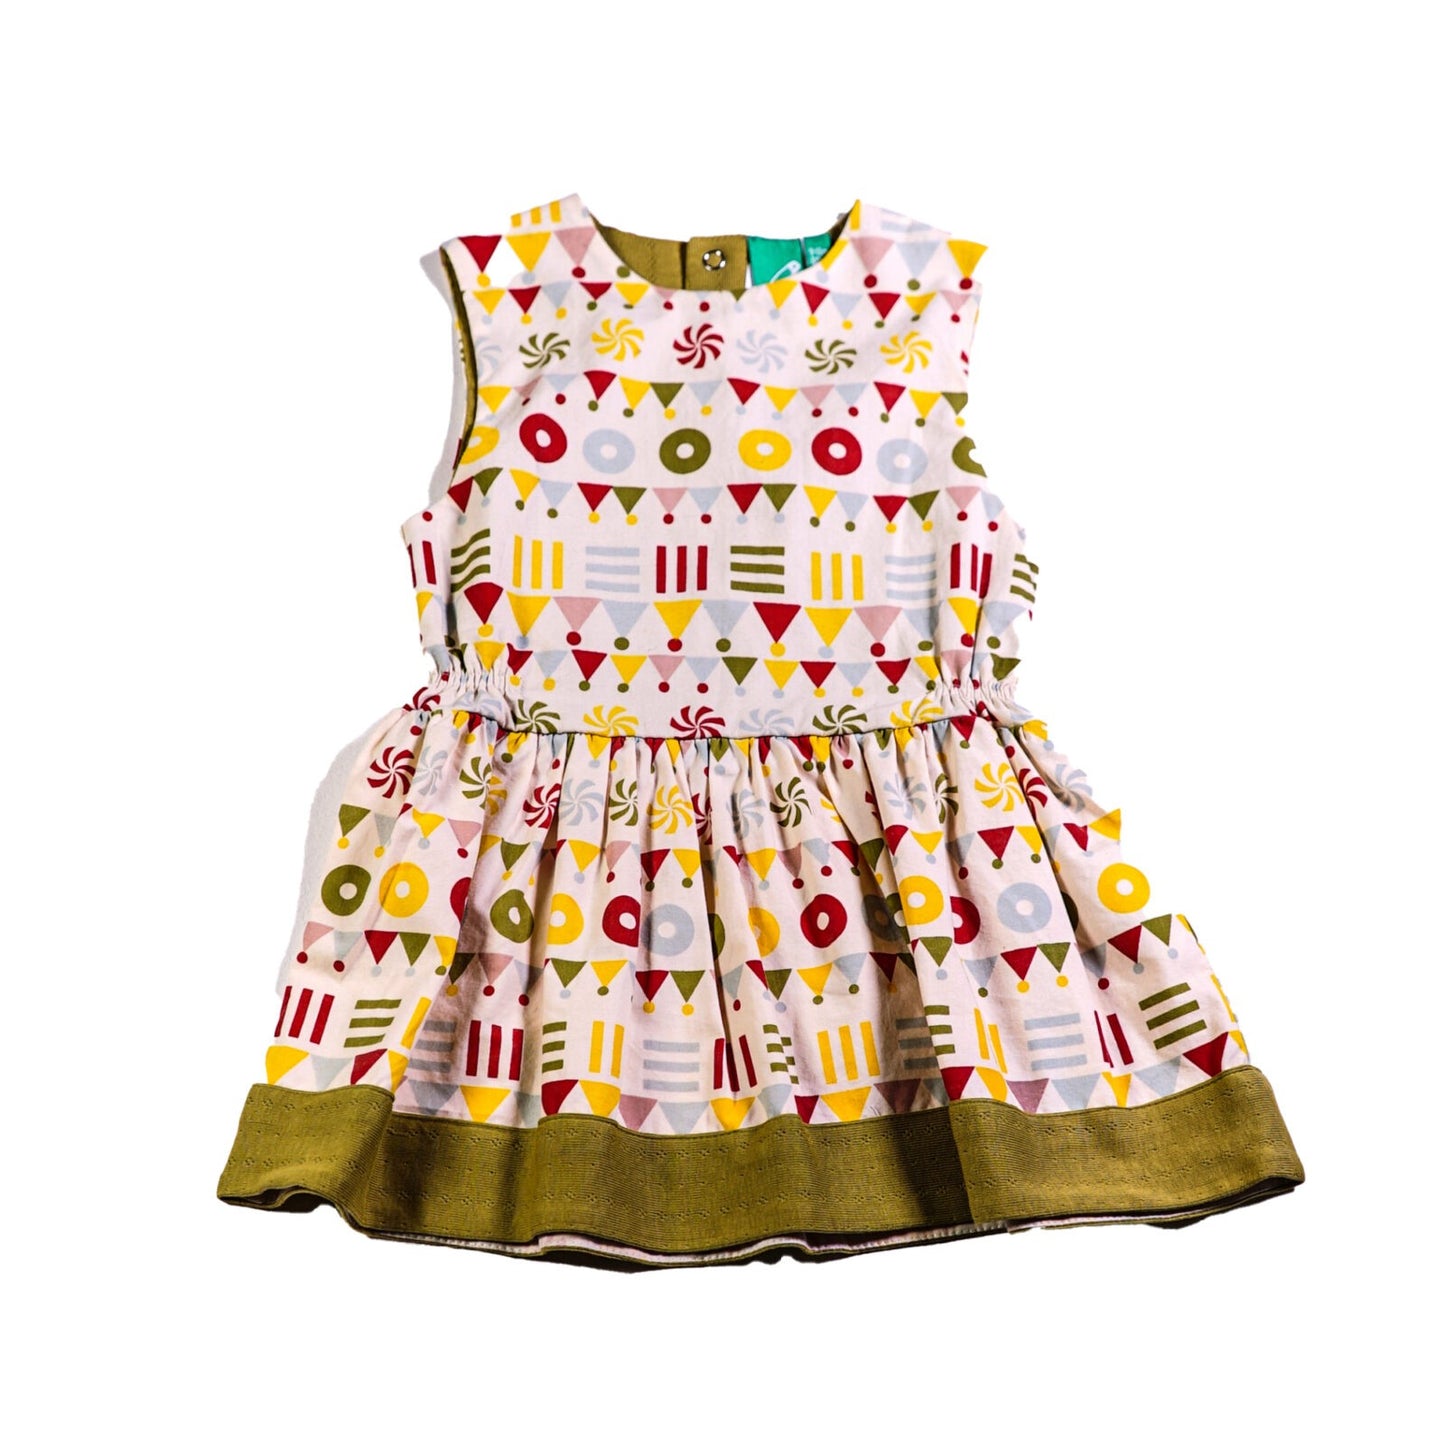 Organic cotton printed sleeveless dress with contrast lining